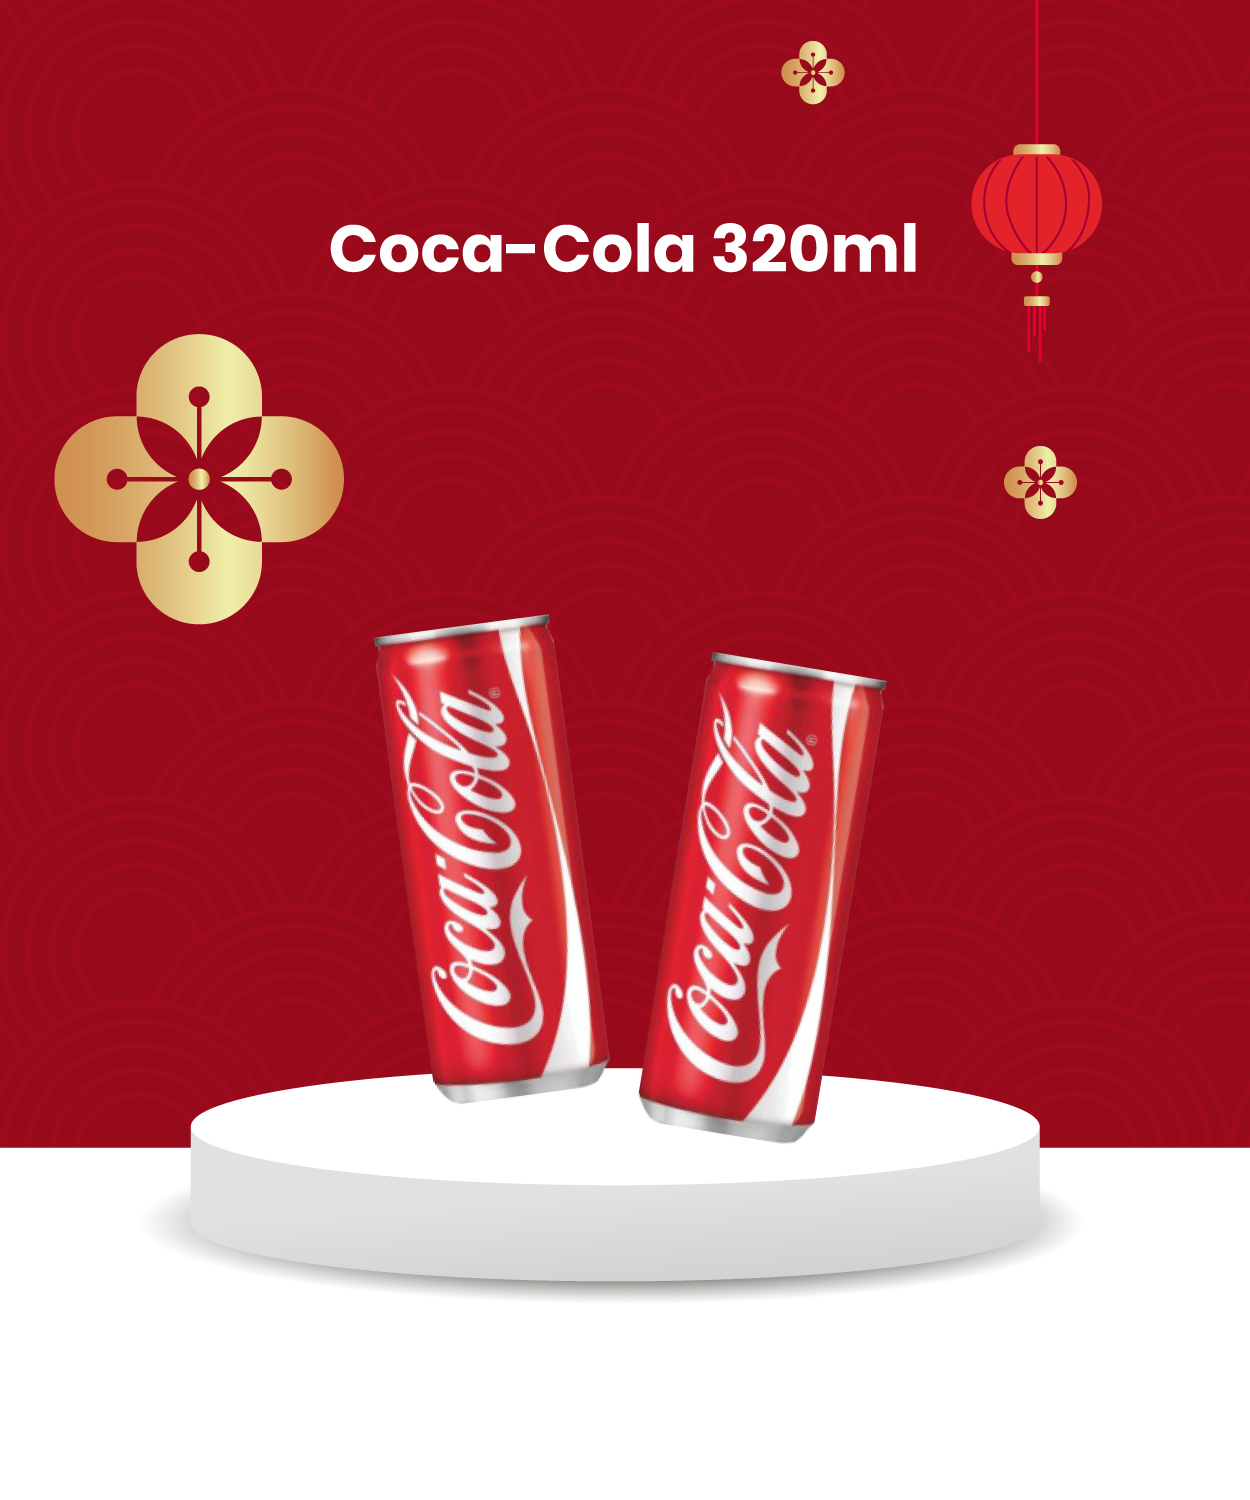 Dropee-bestseller-campaign-cocacola-item-5